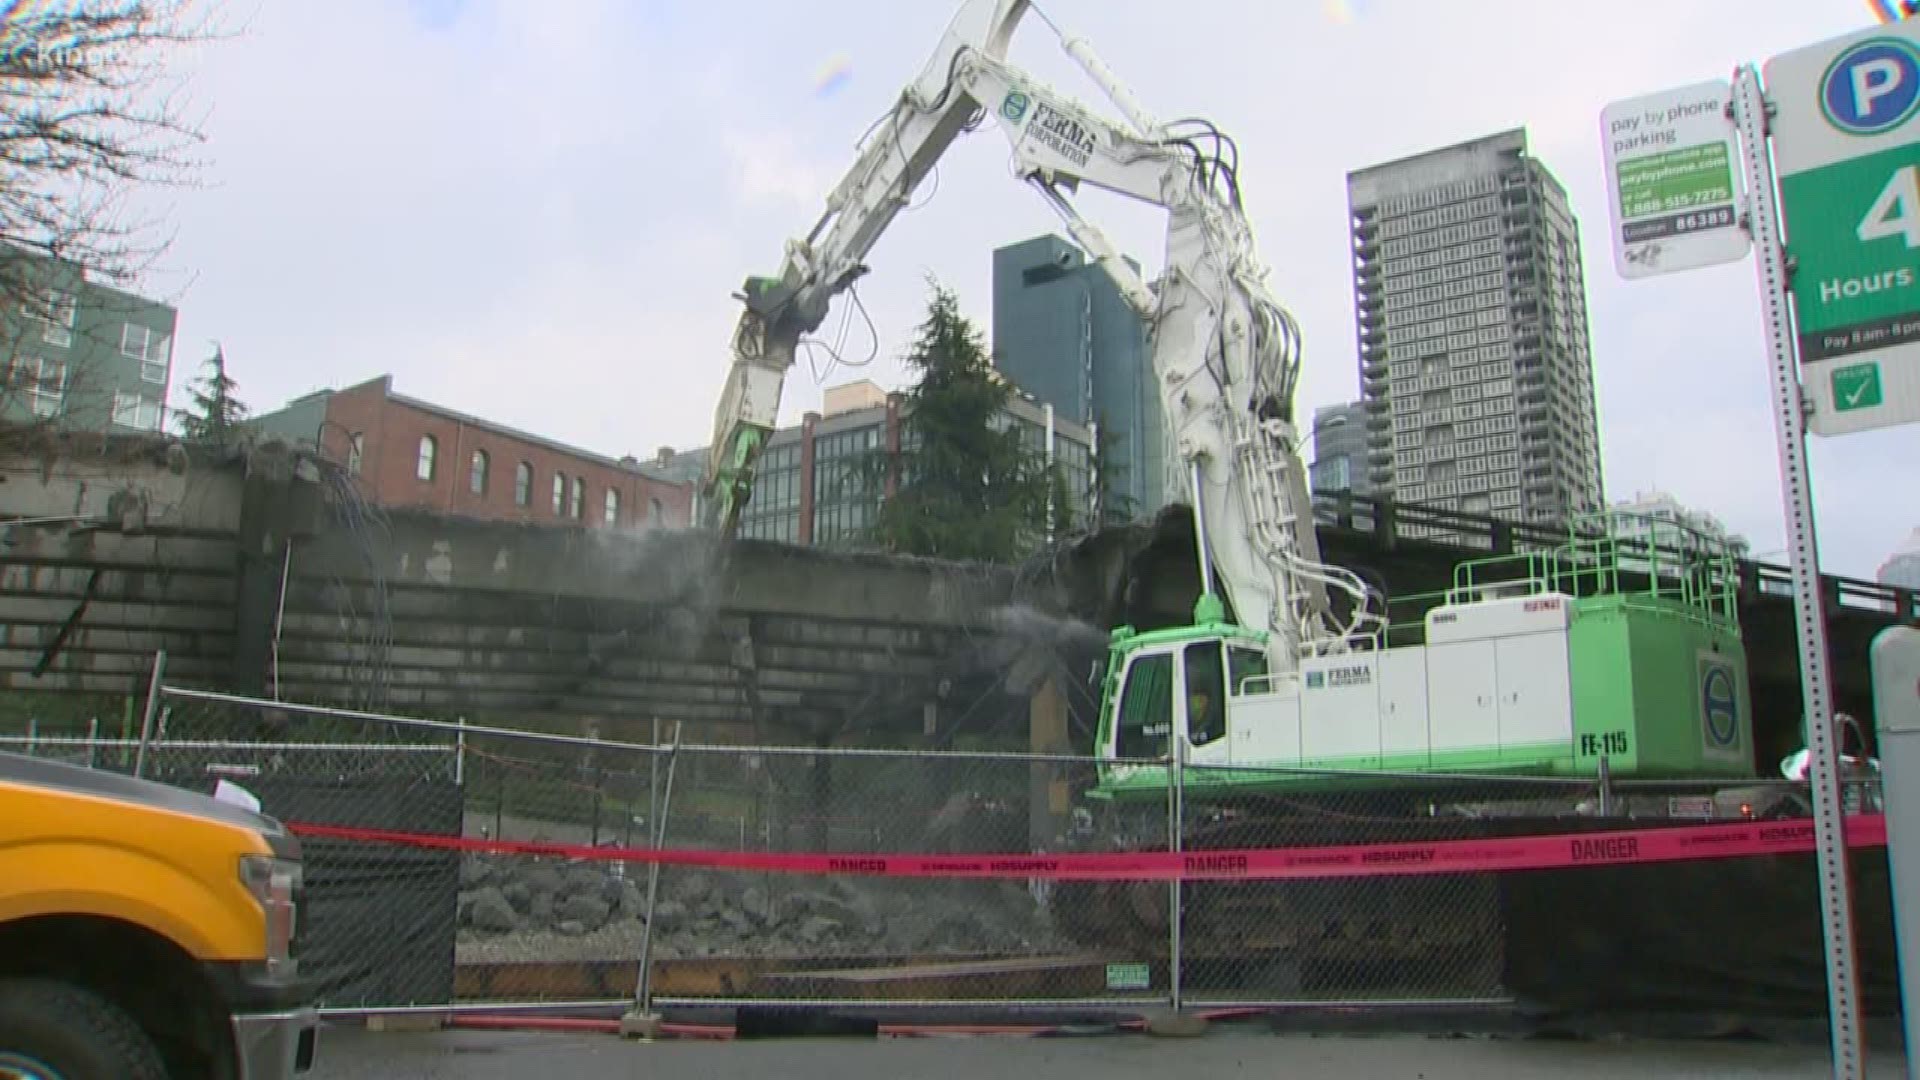 KING 5's Glenn Farley is back out by the viaduct, which is slowly being chipped away.